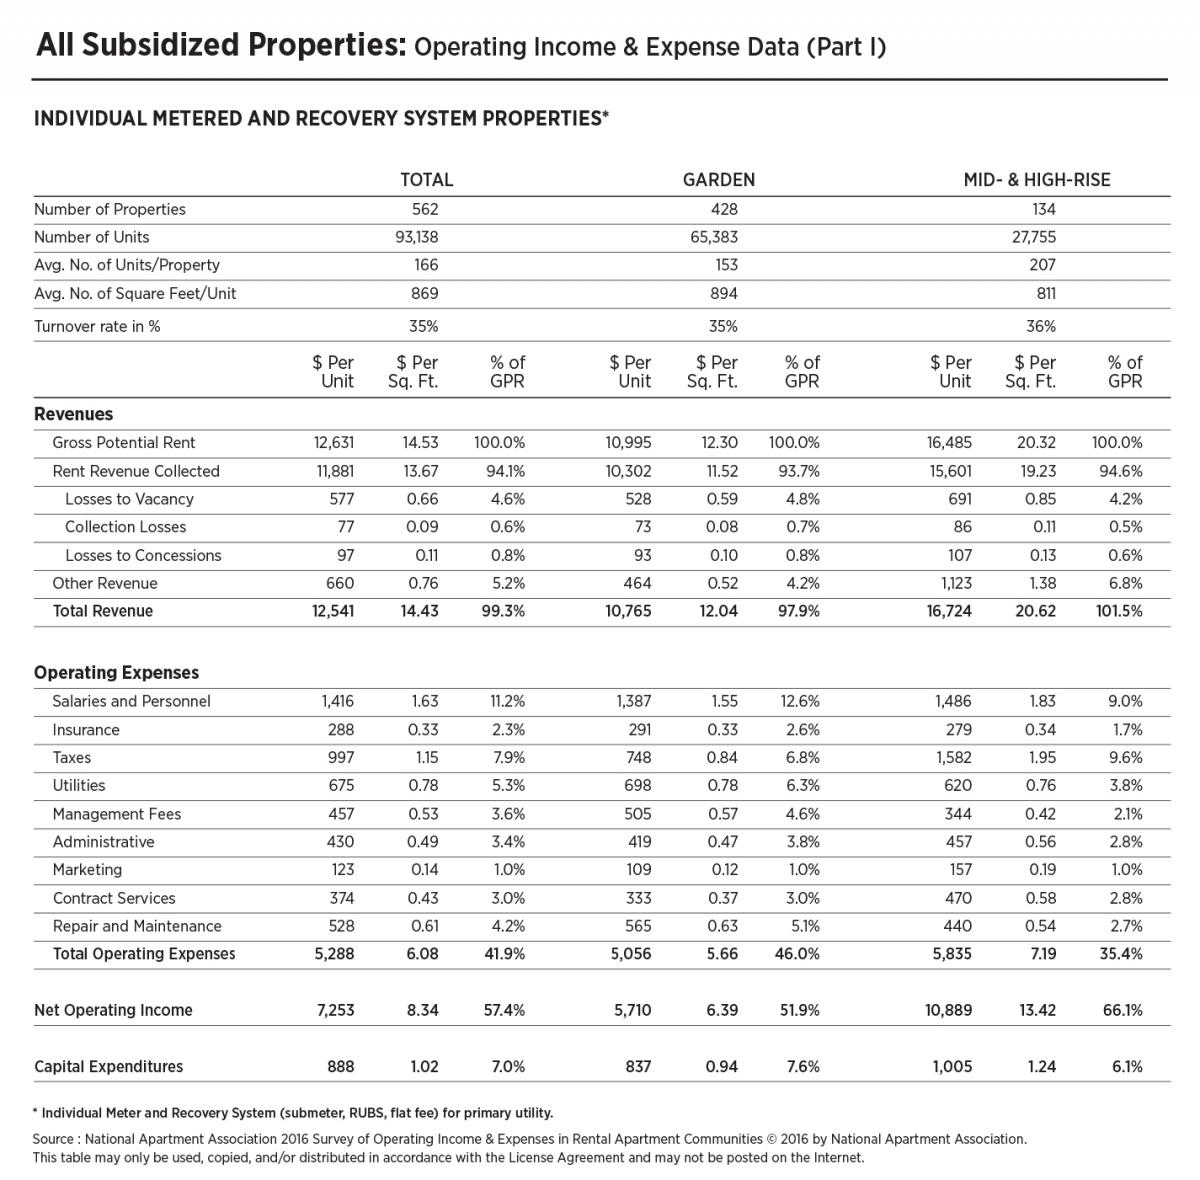 Georgia Apartment Association Lease Agreement 2016 Naa Survey Of Operating Income Expenses In Rental Apartment